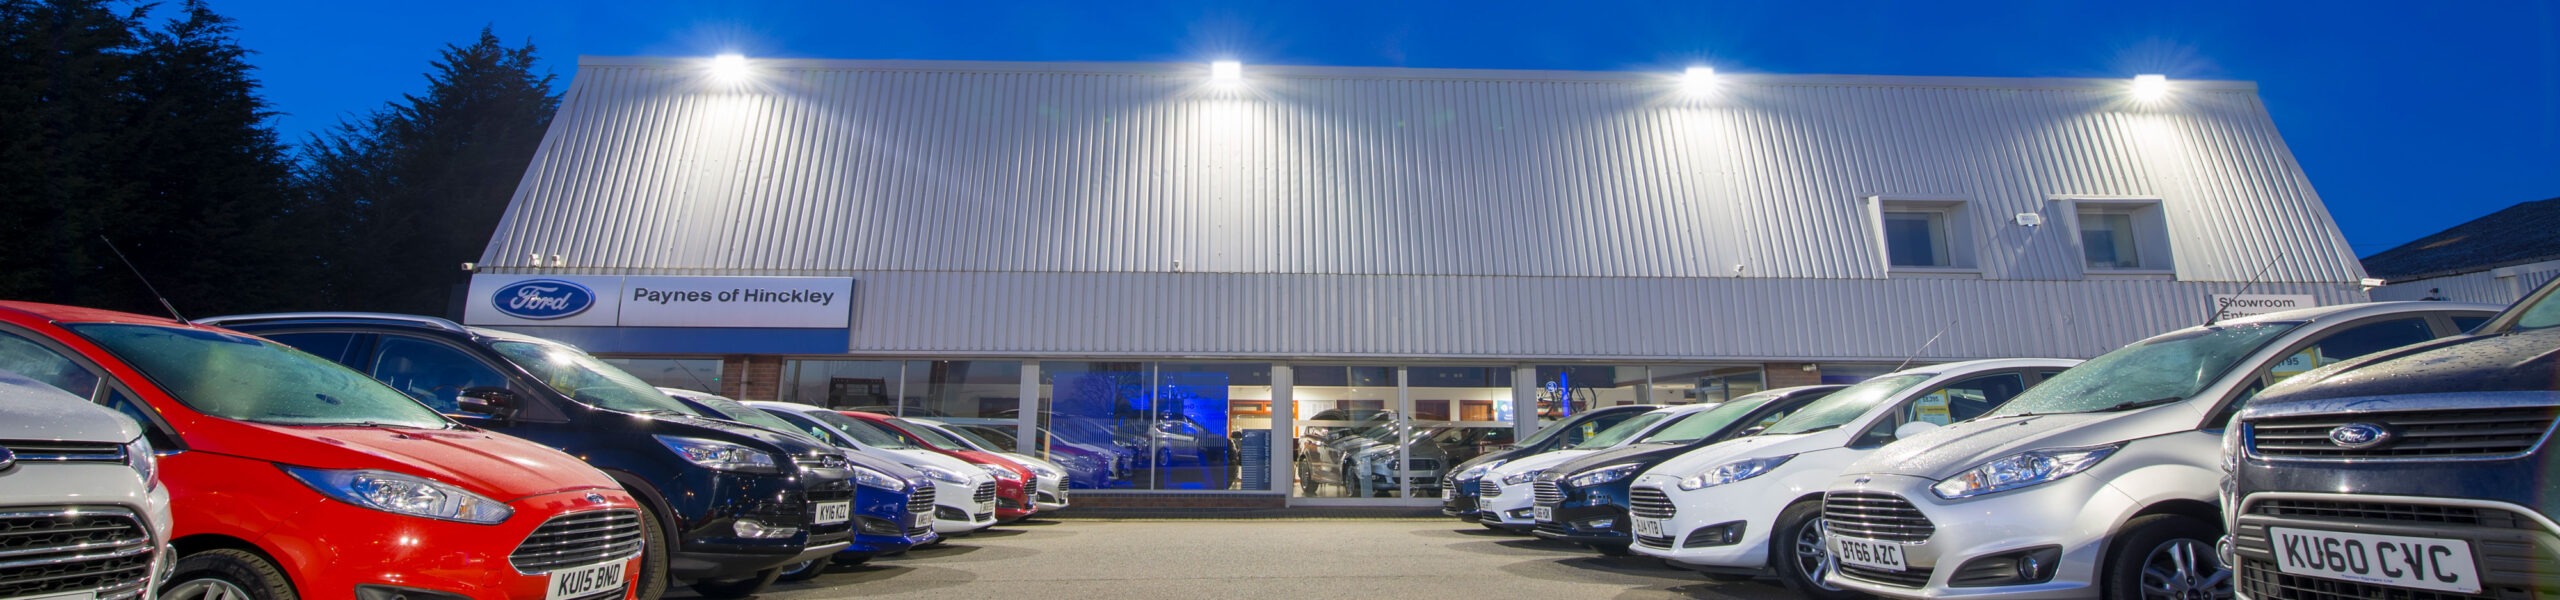 Tamlite Paynes Ford Garage industrial and warehouse LED lighting case study header